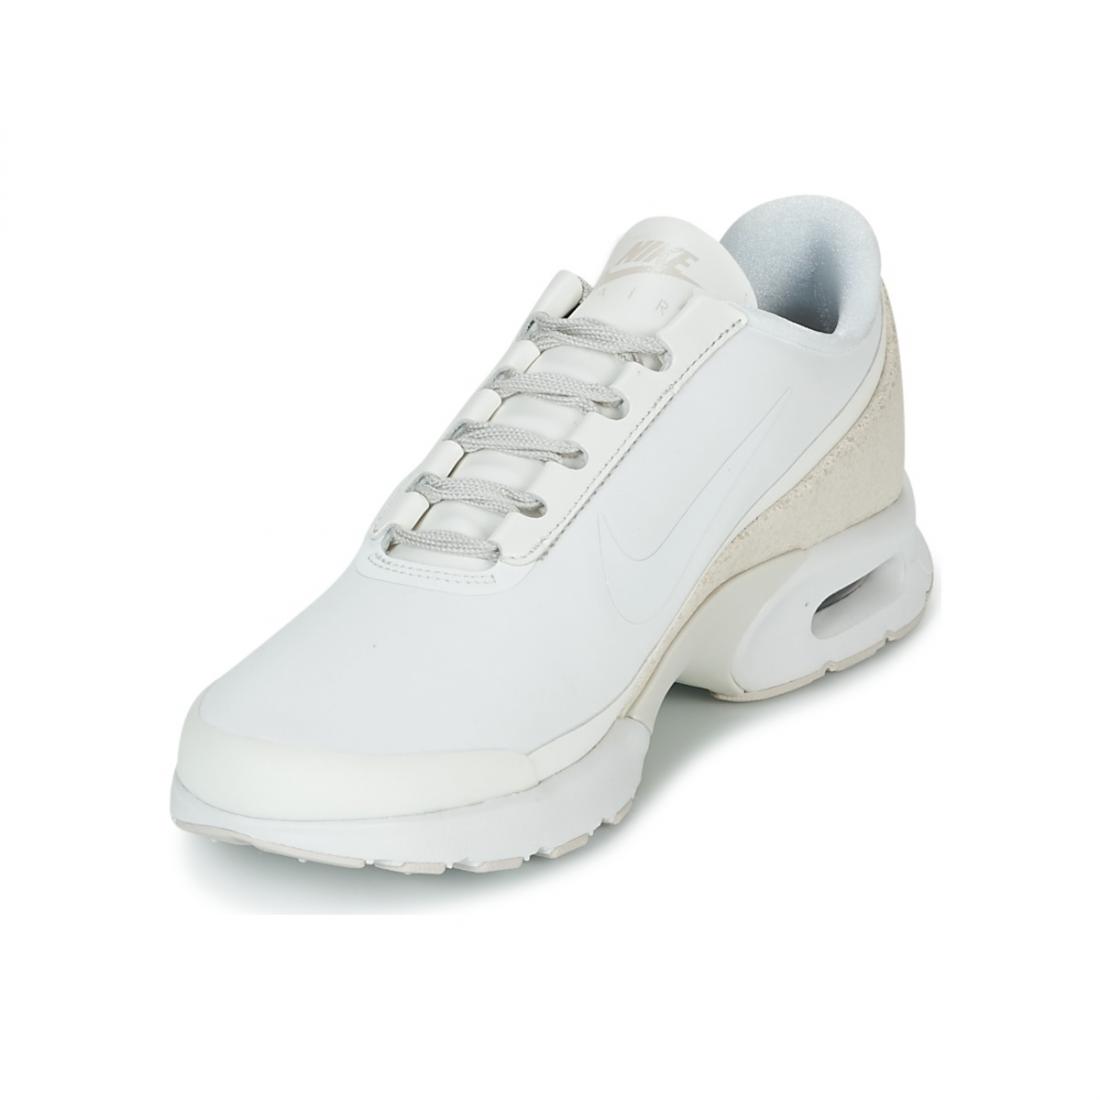 nike air max leather femme